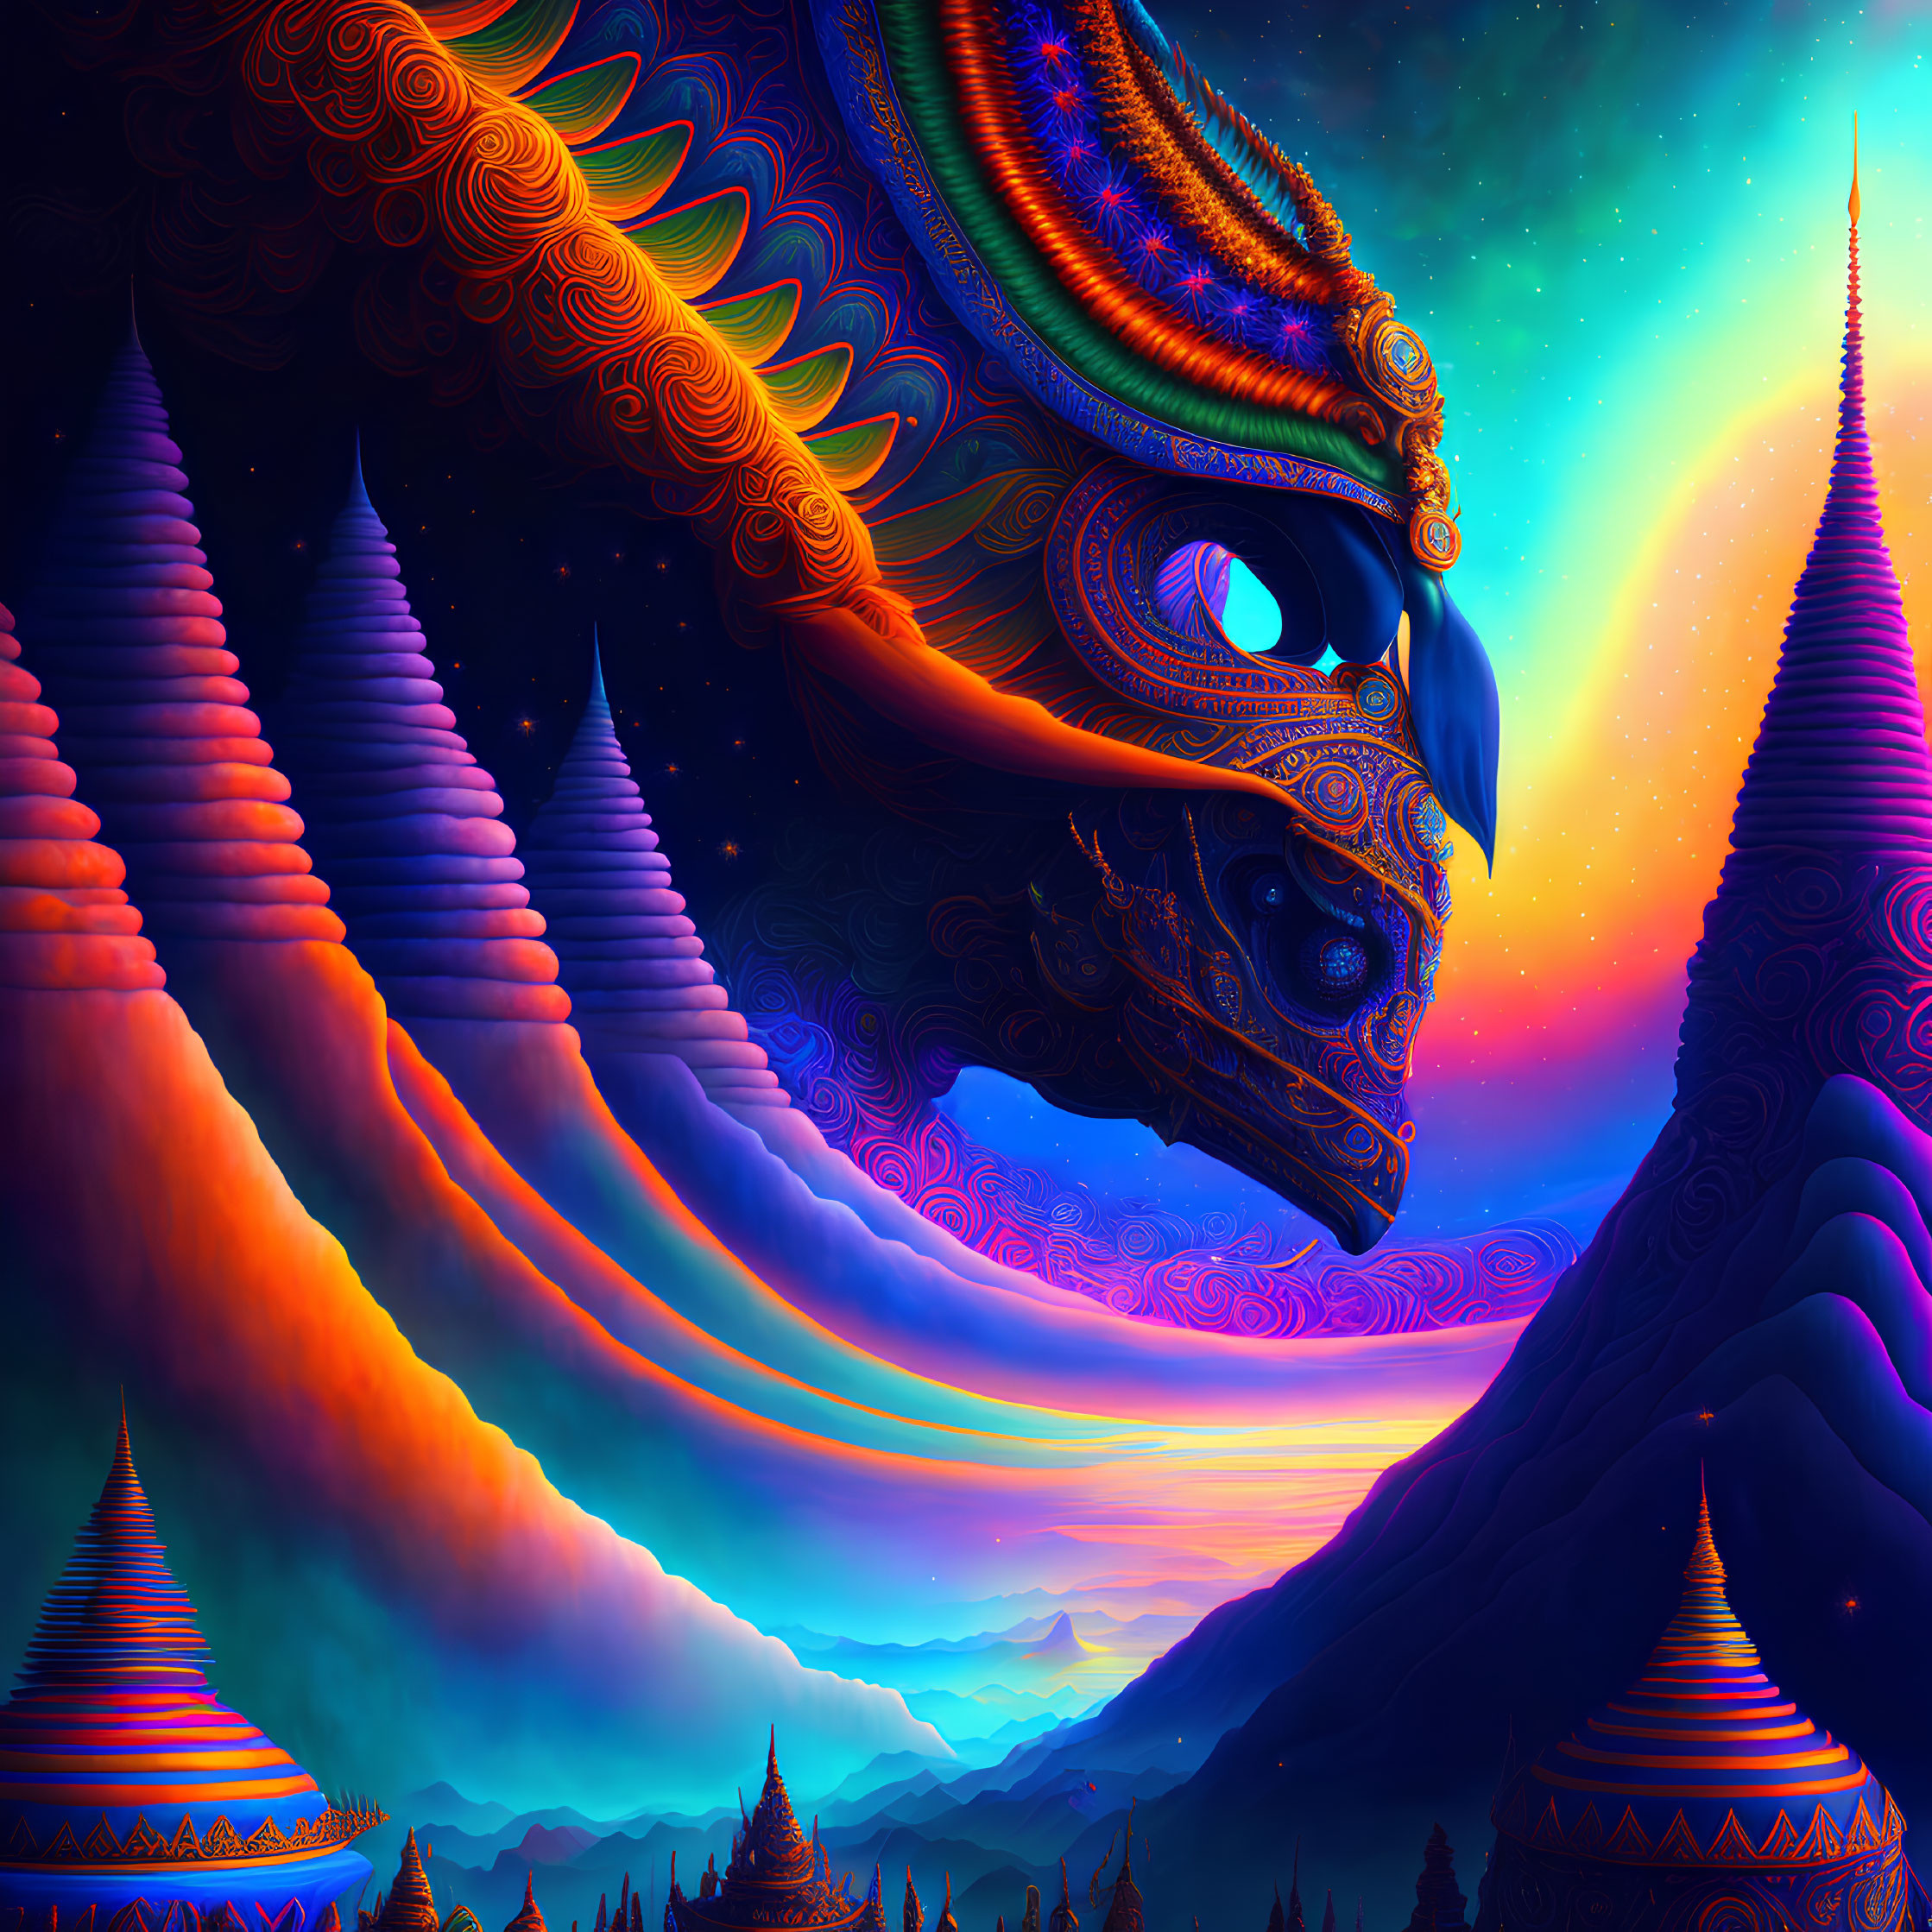 Colorful Stylized Bird Artwork in Mystical Landscape with Towers